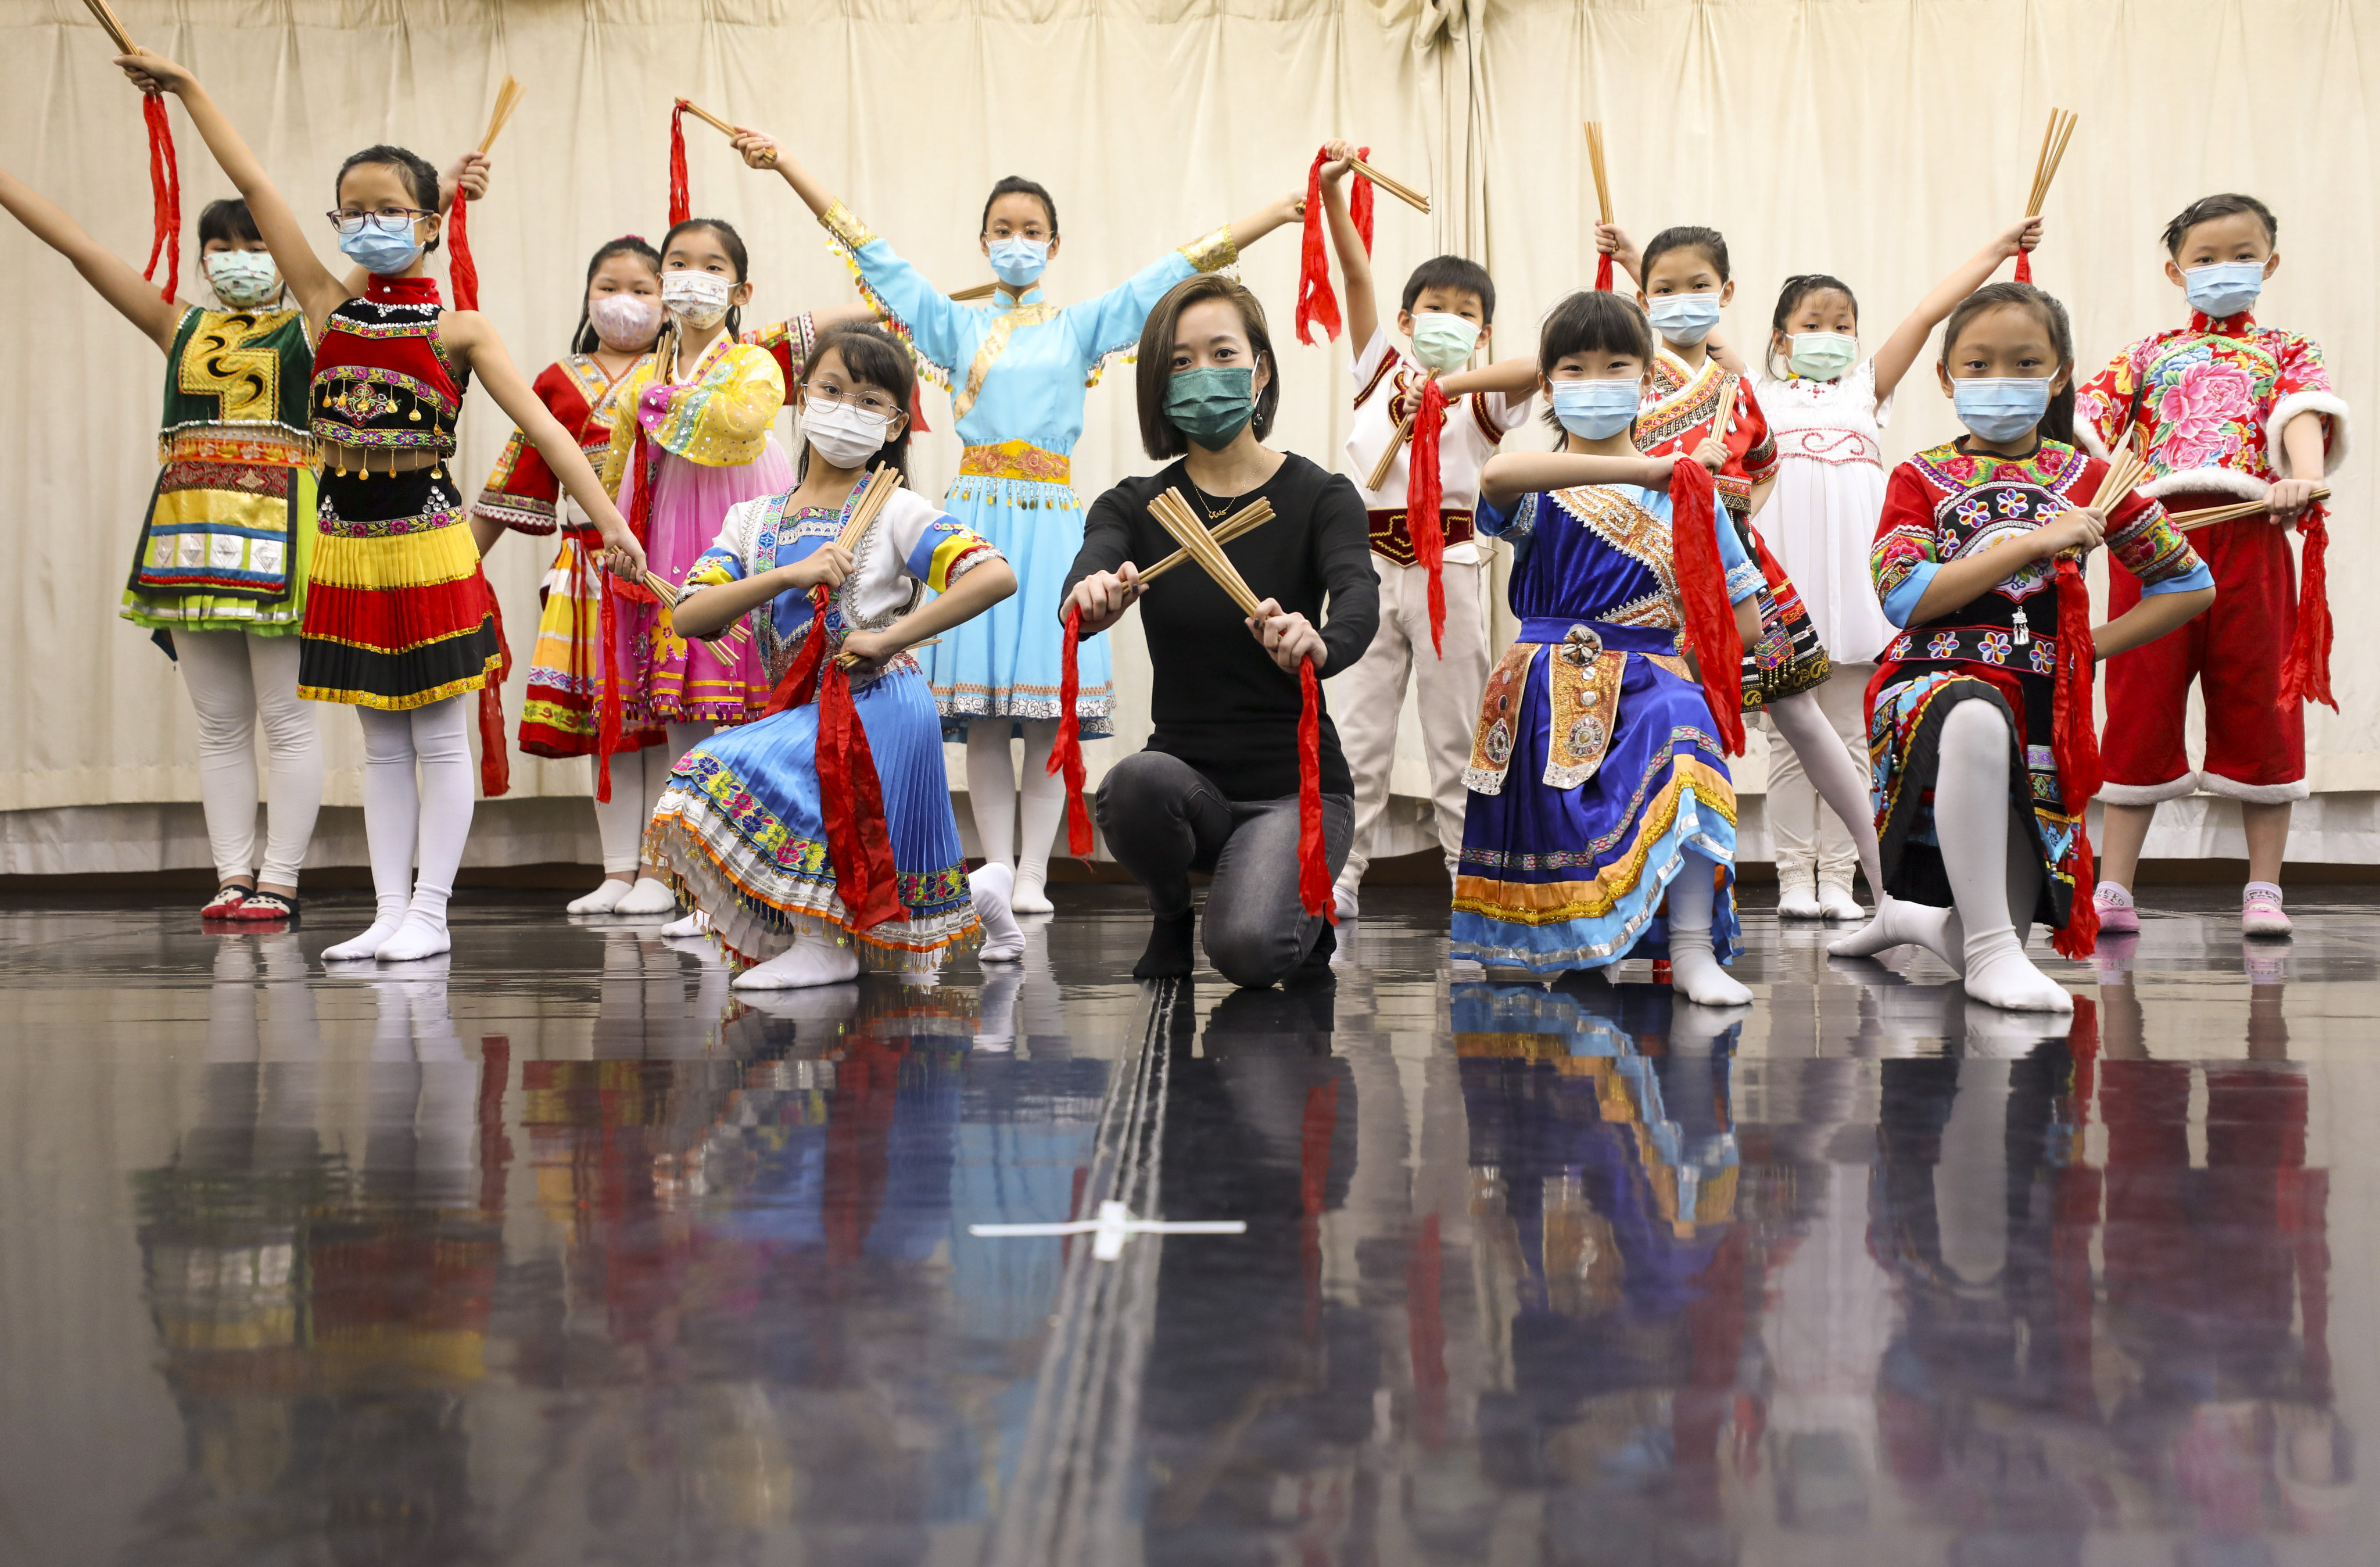 The Chinese traditional dance workshop was sponsored by OSC and was part of this year’s theme of providing the arts to the underprivileged. Photo: Xiaomei Chen